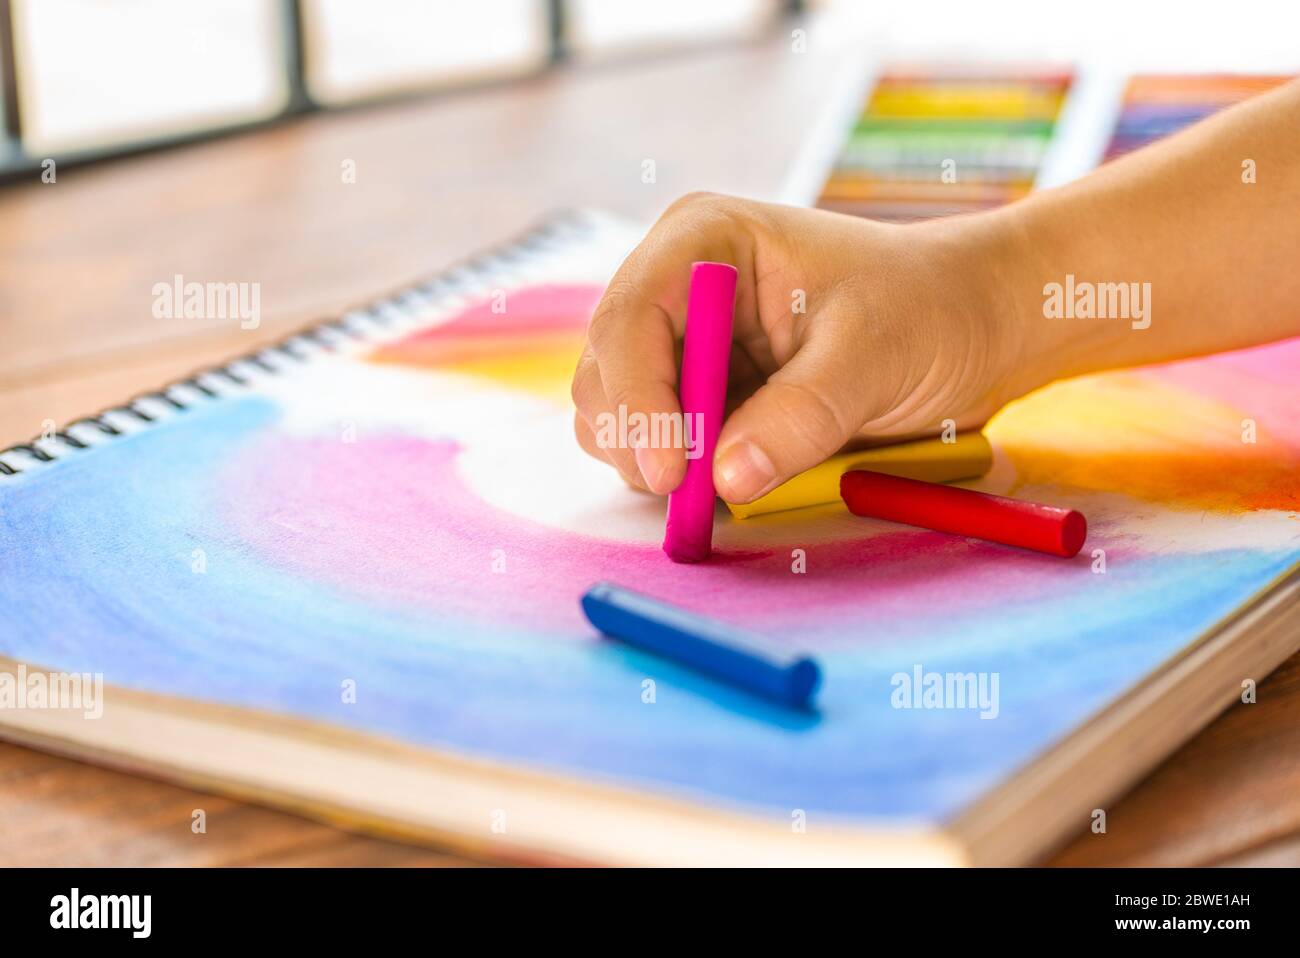 https://c8.alamy.com/comp/2BWE1AH/girls-hand-making-a-multi-colored-drawing-with-colorful-wax-crayon-on-a-sketch-pad-2BWE1AH.jpg